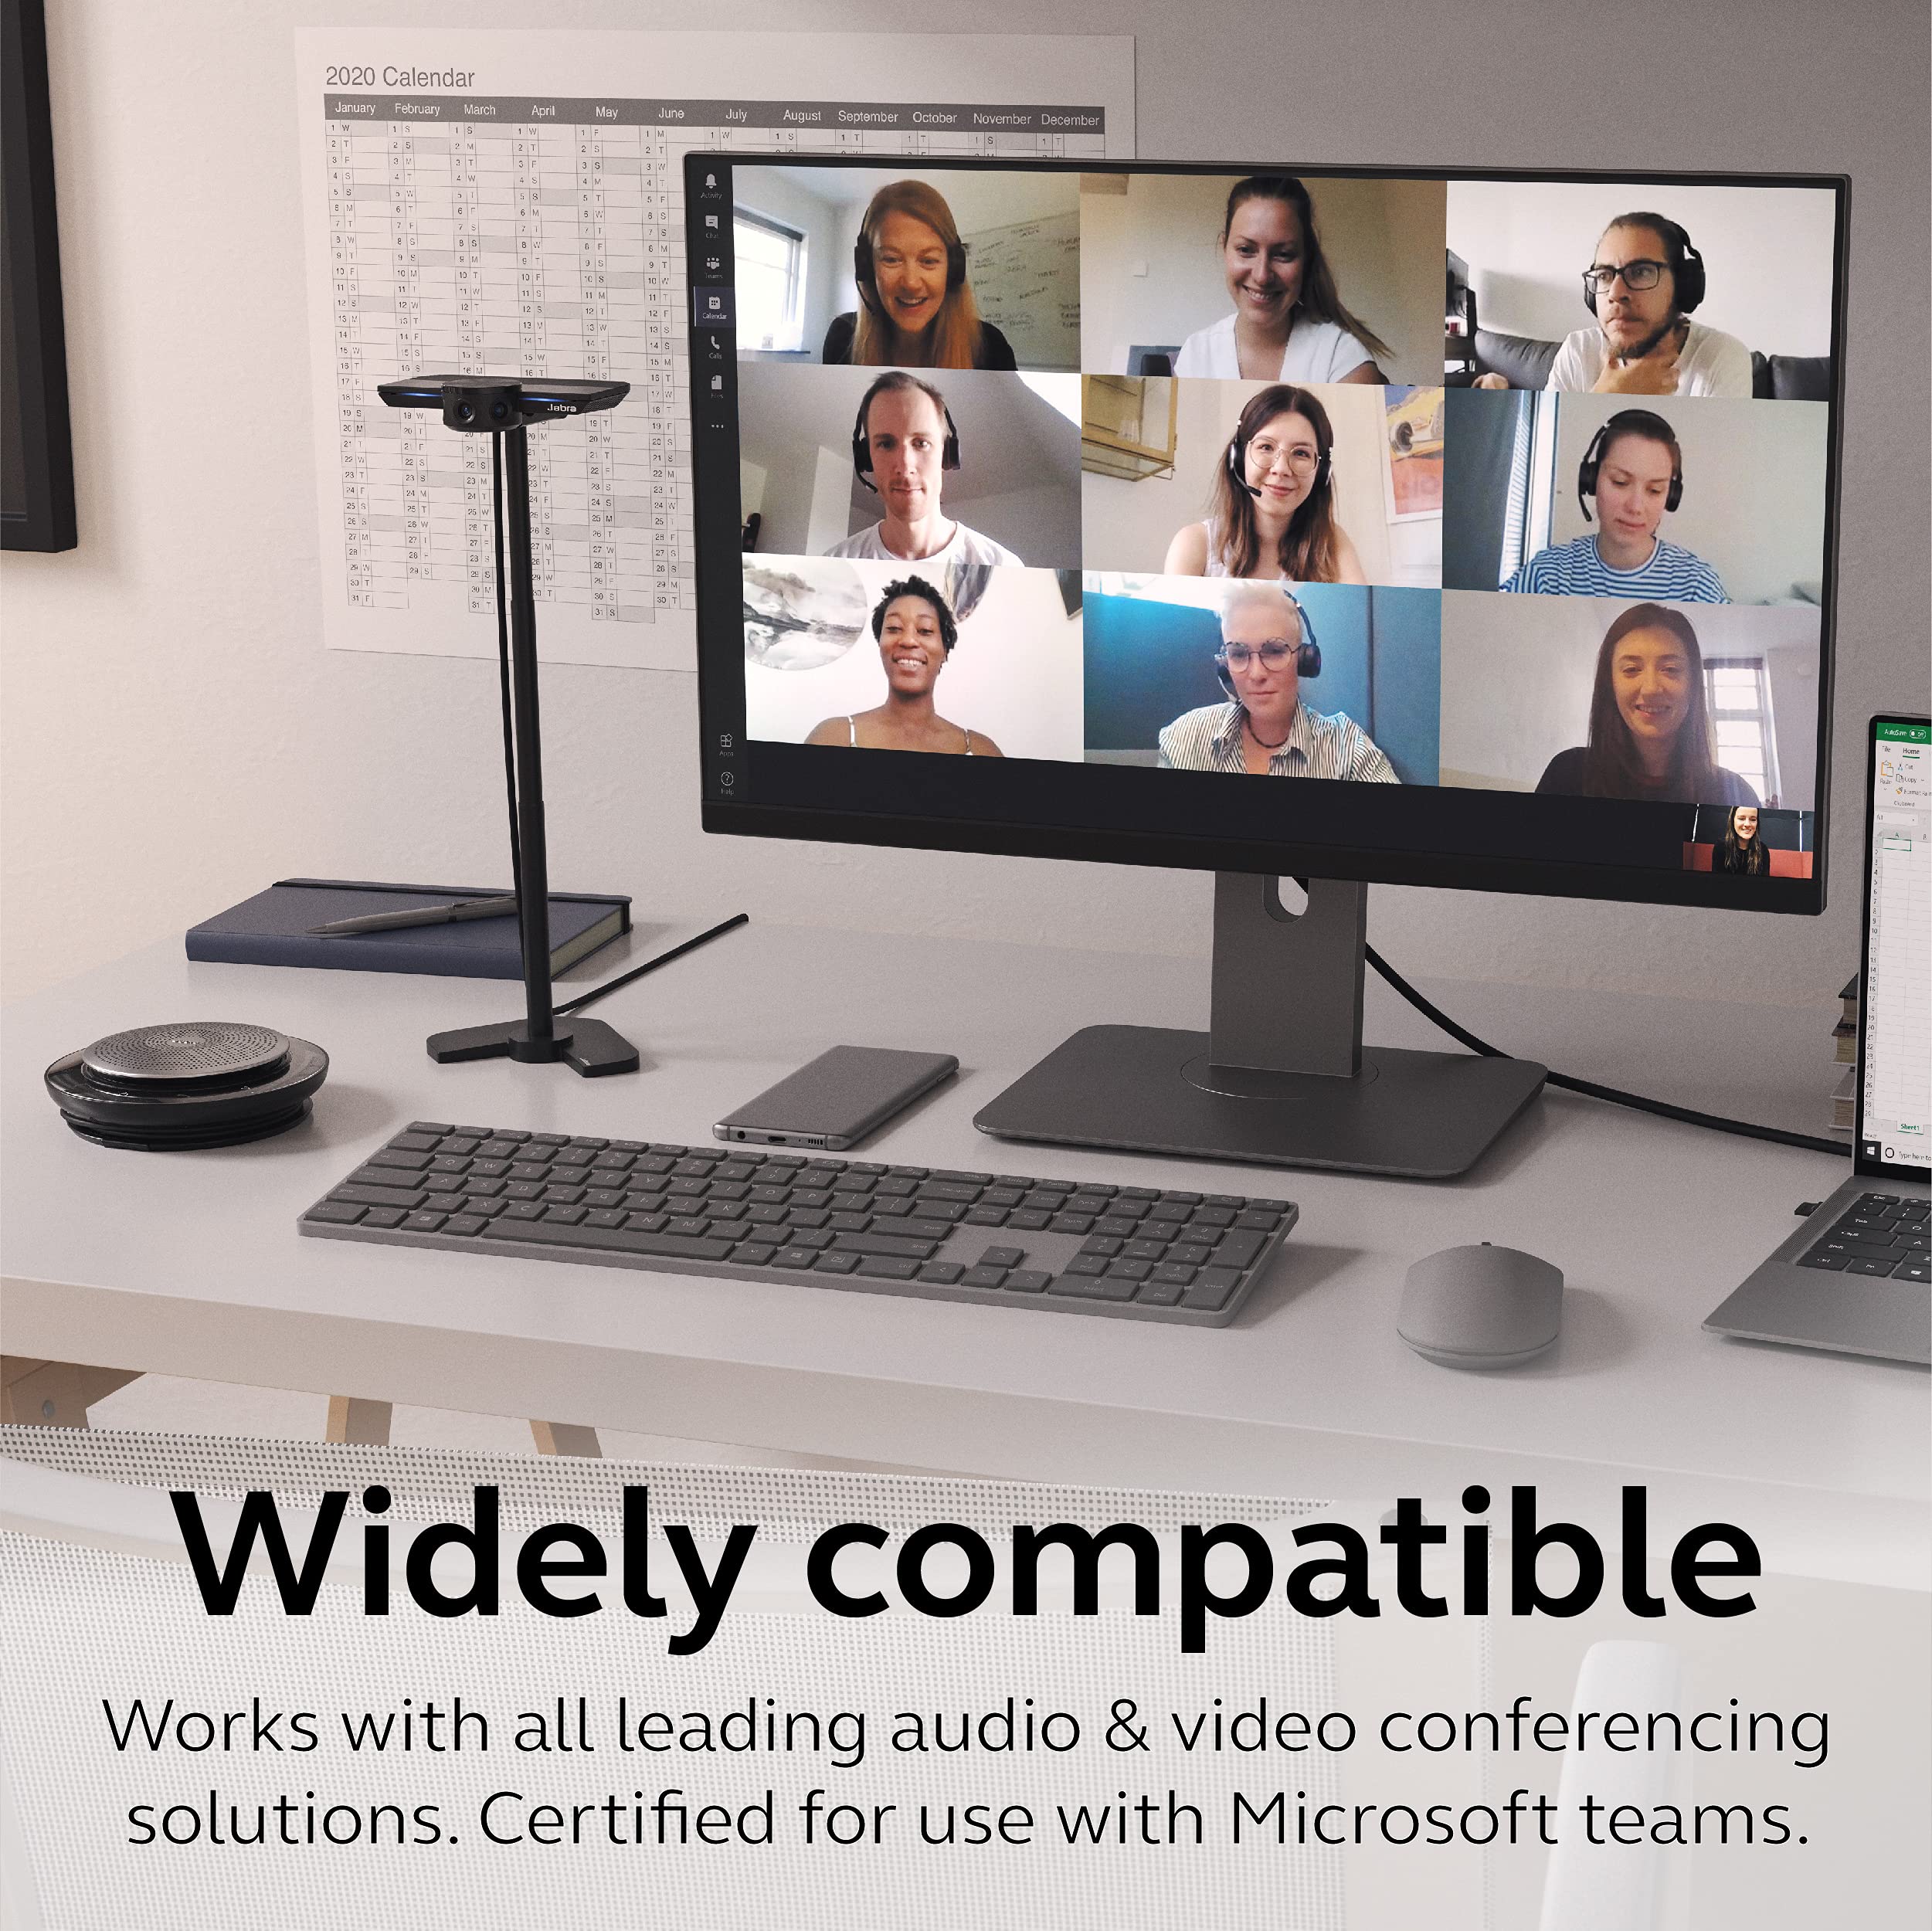 Jabra PanaCast – Intelligent 180° Panoramic-4K Huddle Room Video Camera – Inclusive Video Conferencing Camera with Full Room Coverage, Easy to Set-Up Wide Angle Webcam for Streaming